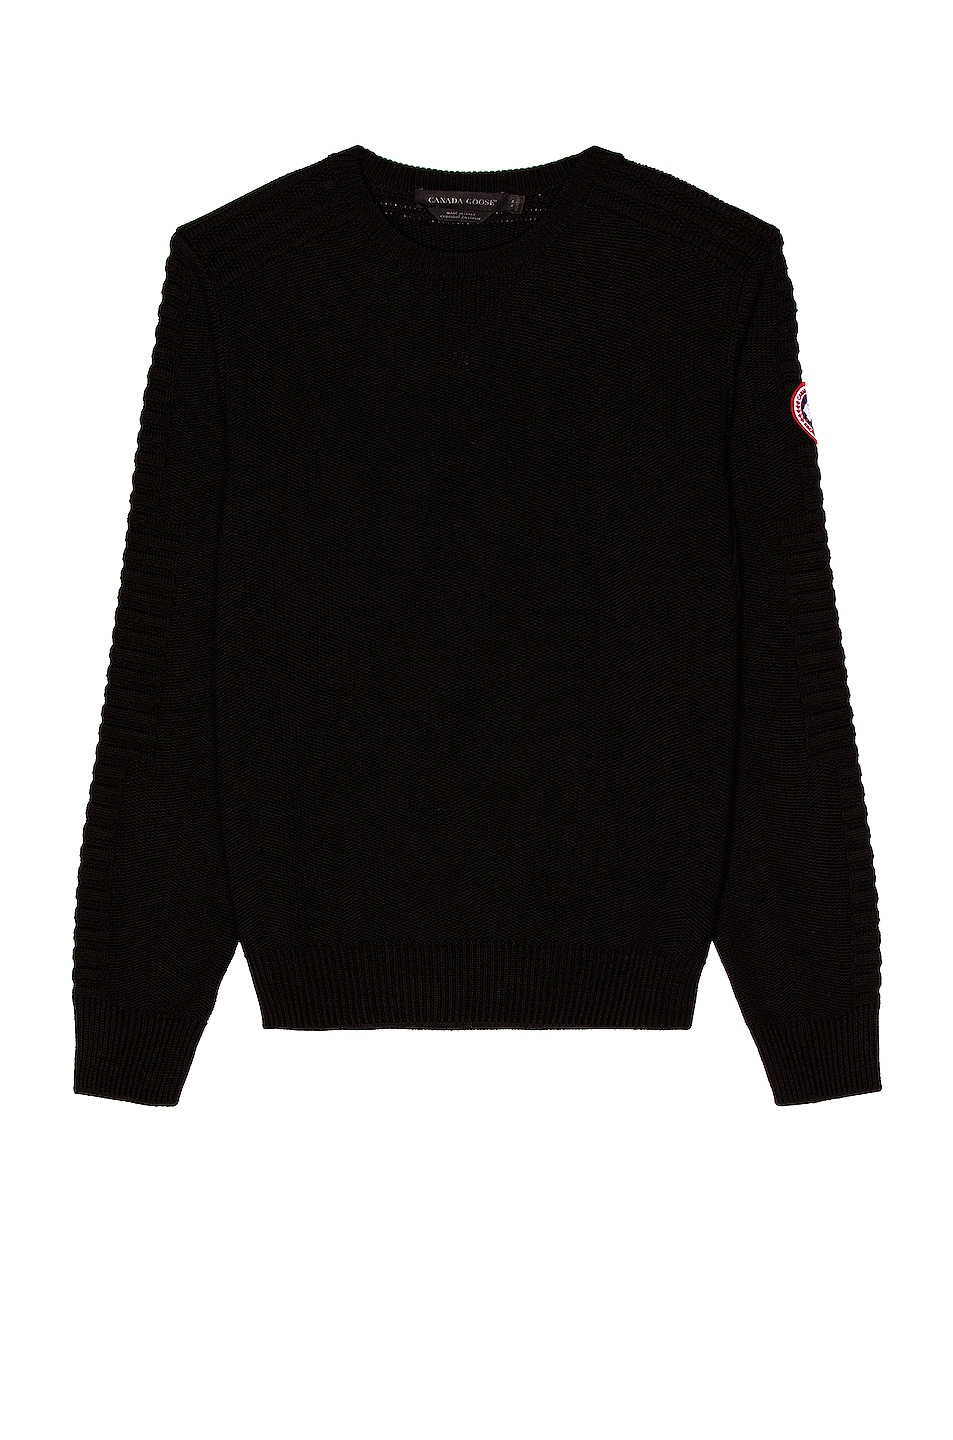 Image 1 of Canada Goose Paterson Sweater in Black